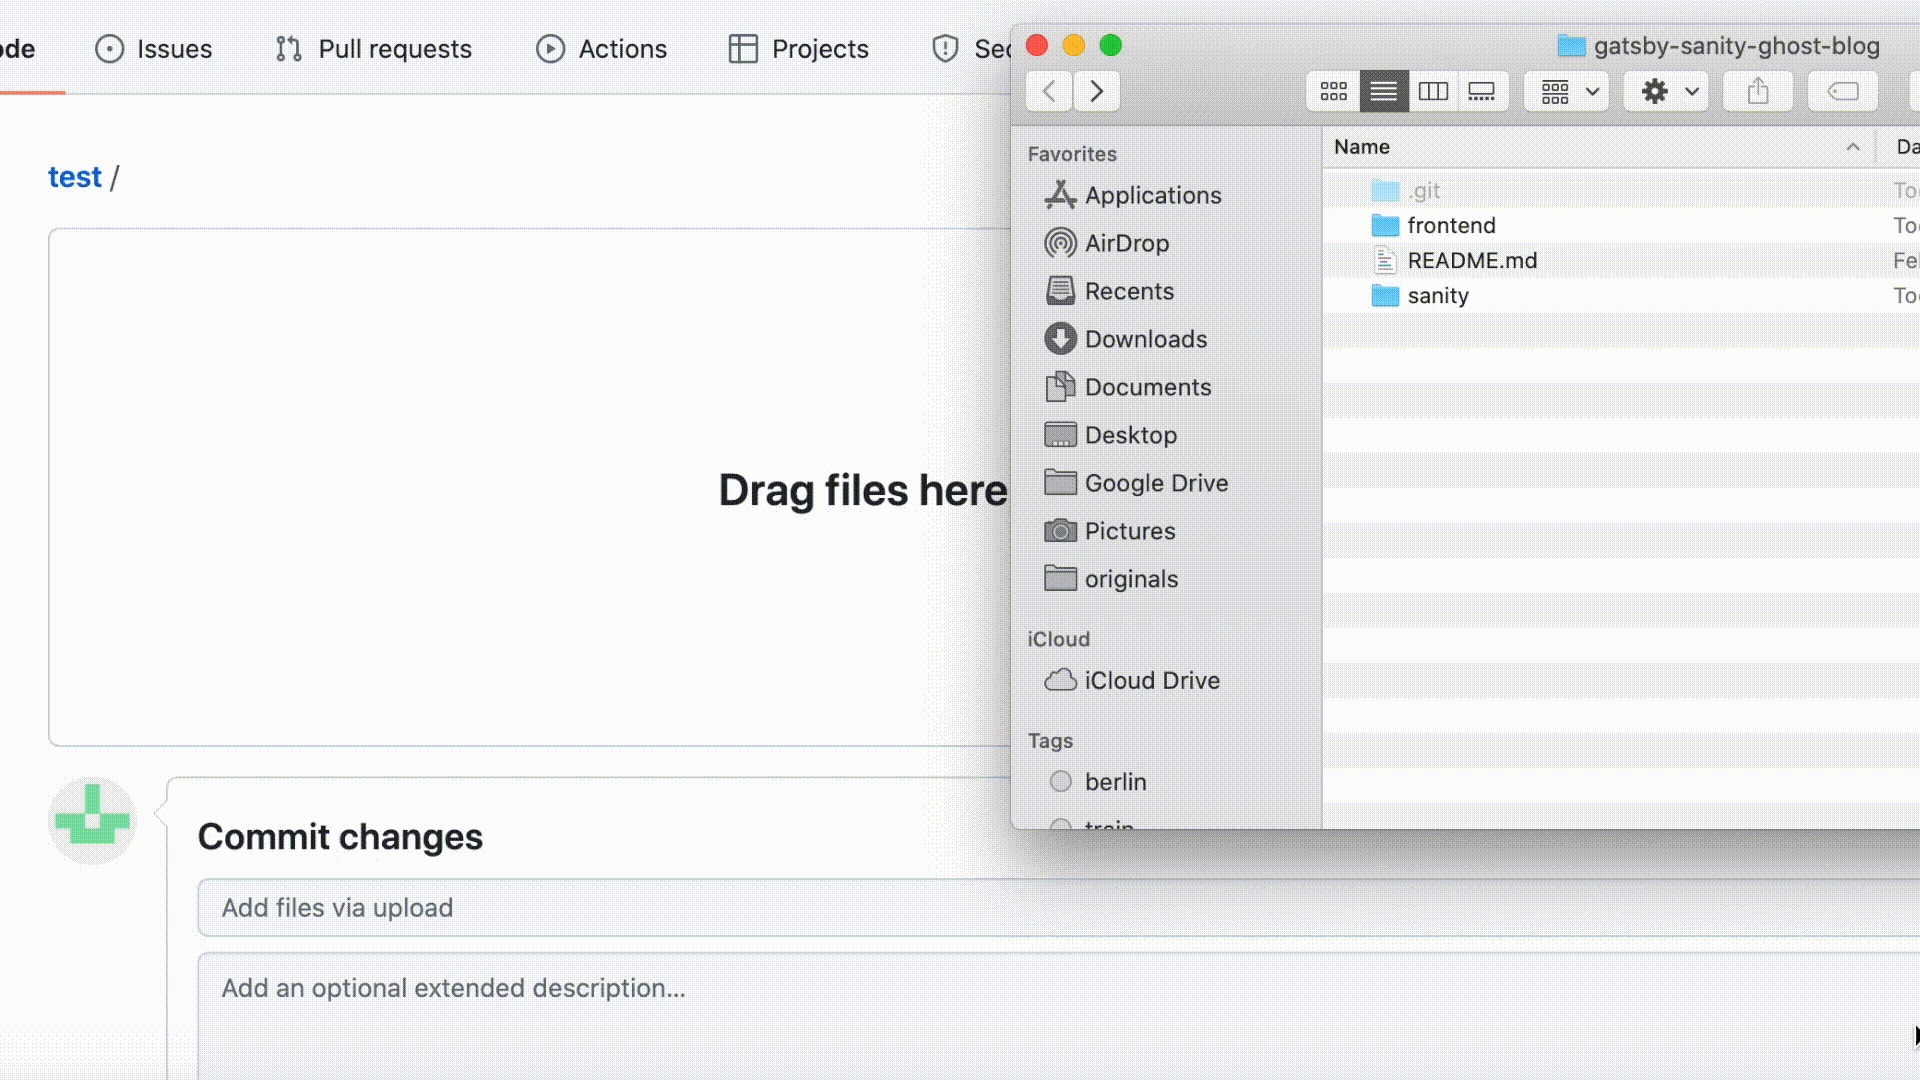 Uploading the folders to Github repsoitory using Github's drag and drop functionality. Not that you can upload no more than 100 files with one commit.